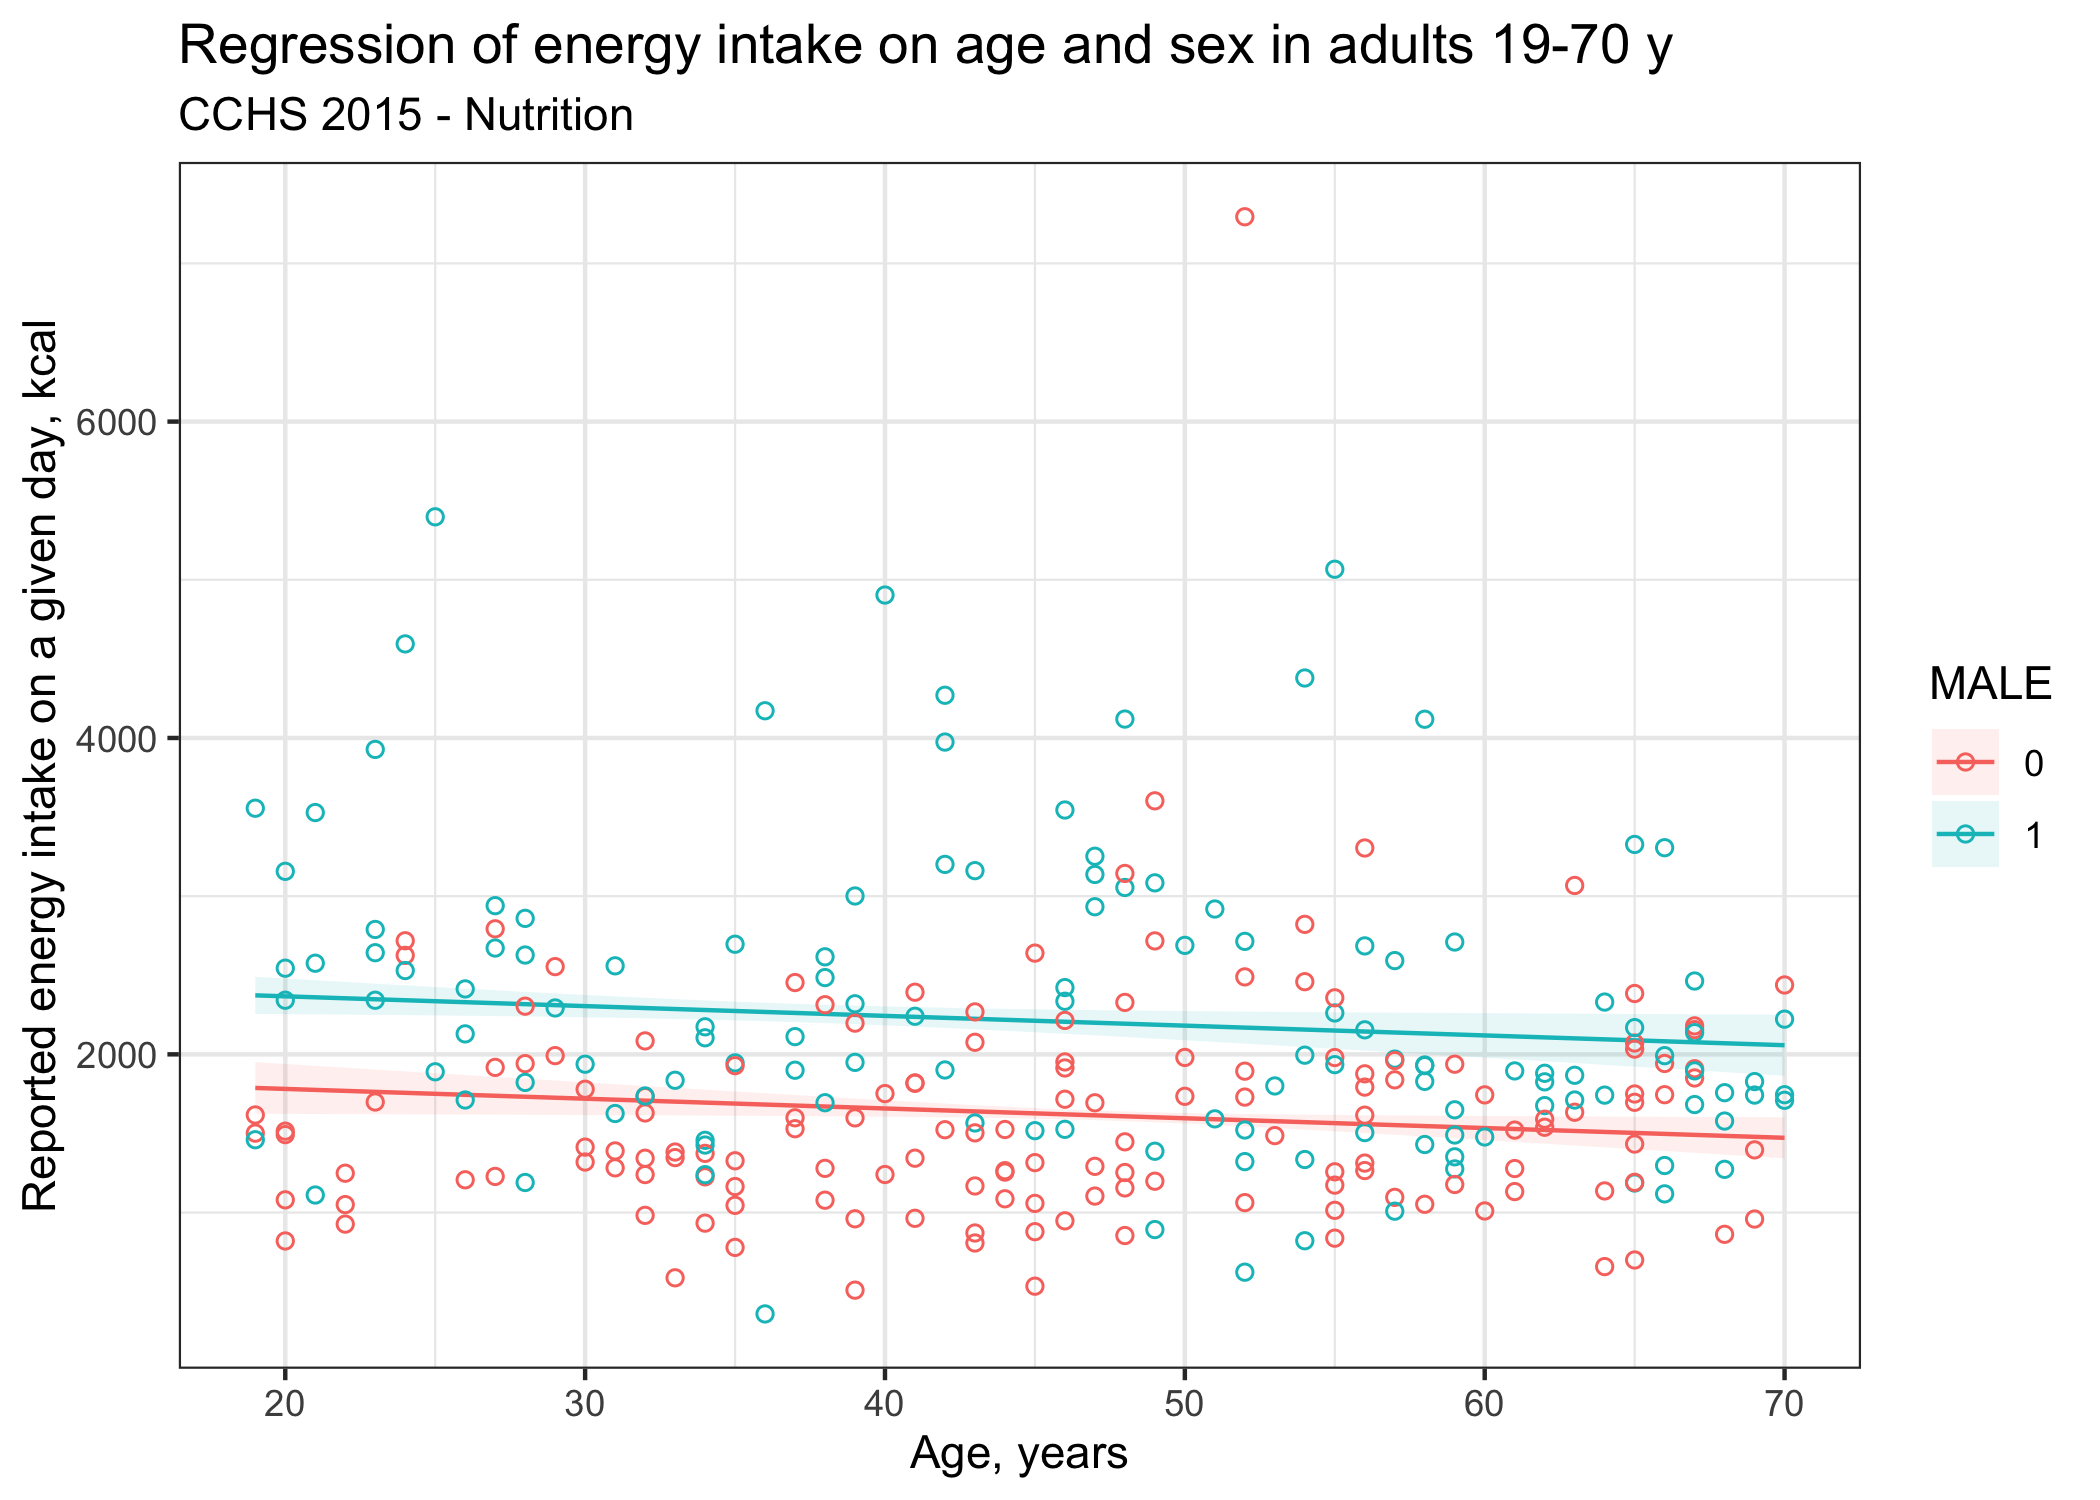 Regression curve of energy intake on age and sex in adults 19-70 y